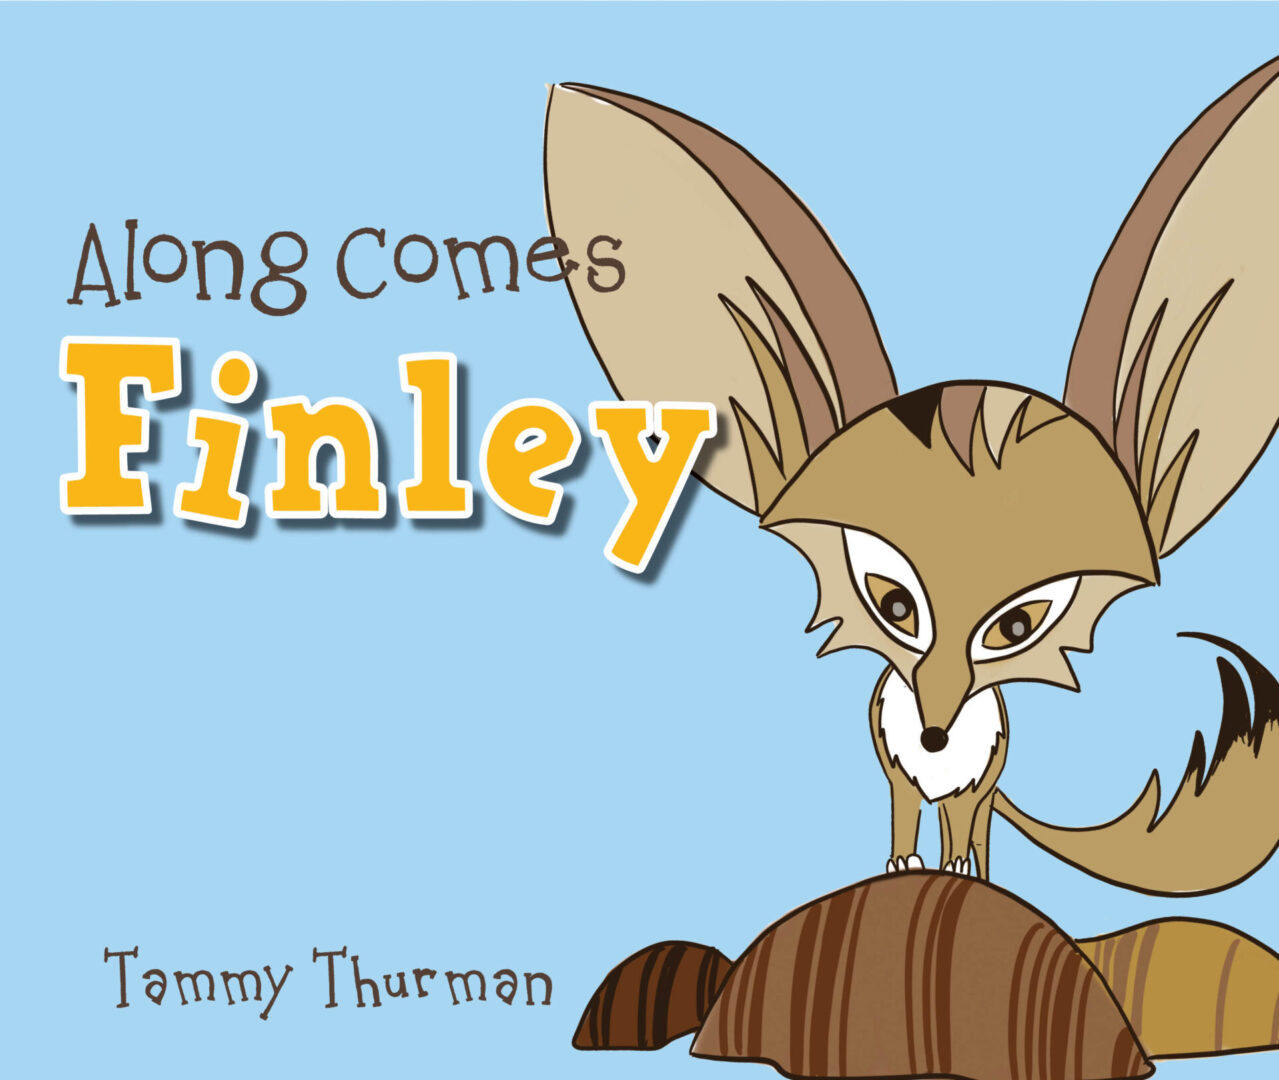 Illustration of a cartoon fox on a book cover titled "Along Comes Finley" by Tammy Thurman.